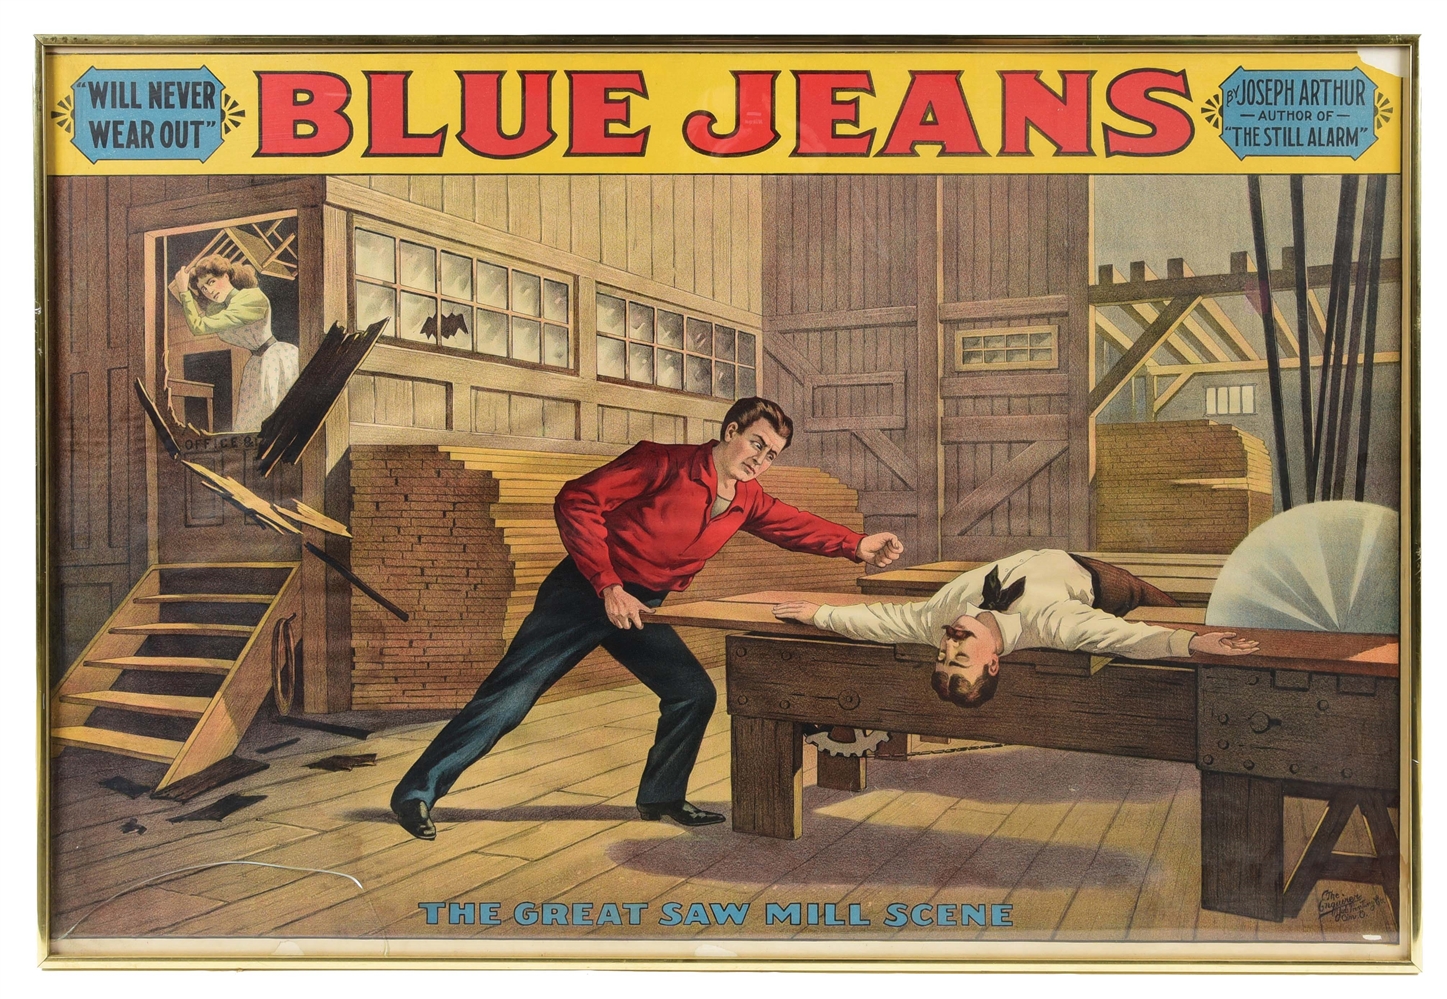 "WILL NEVER WEAR OUT" BLUE JEANS PAPER LITHOGRAPH ADVERTISEMENT.